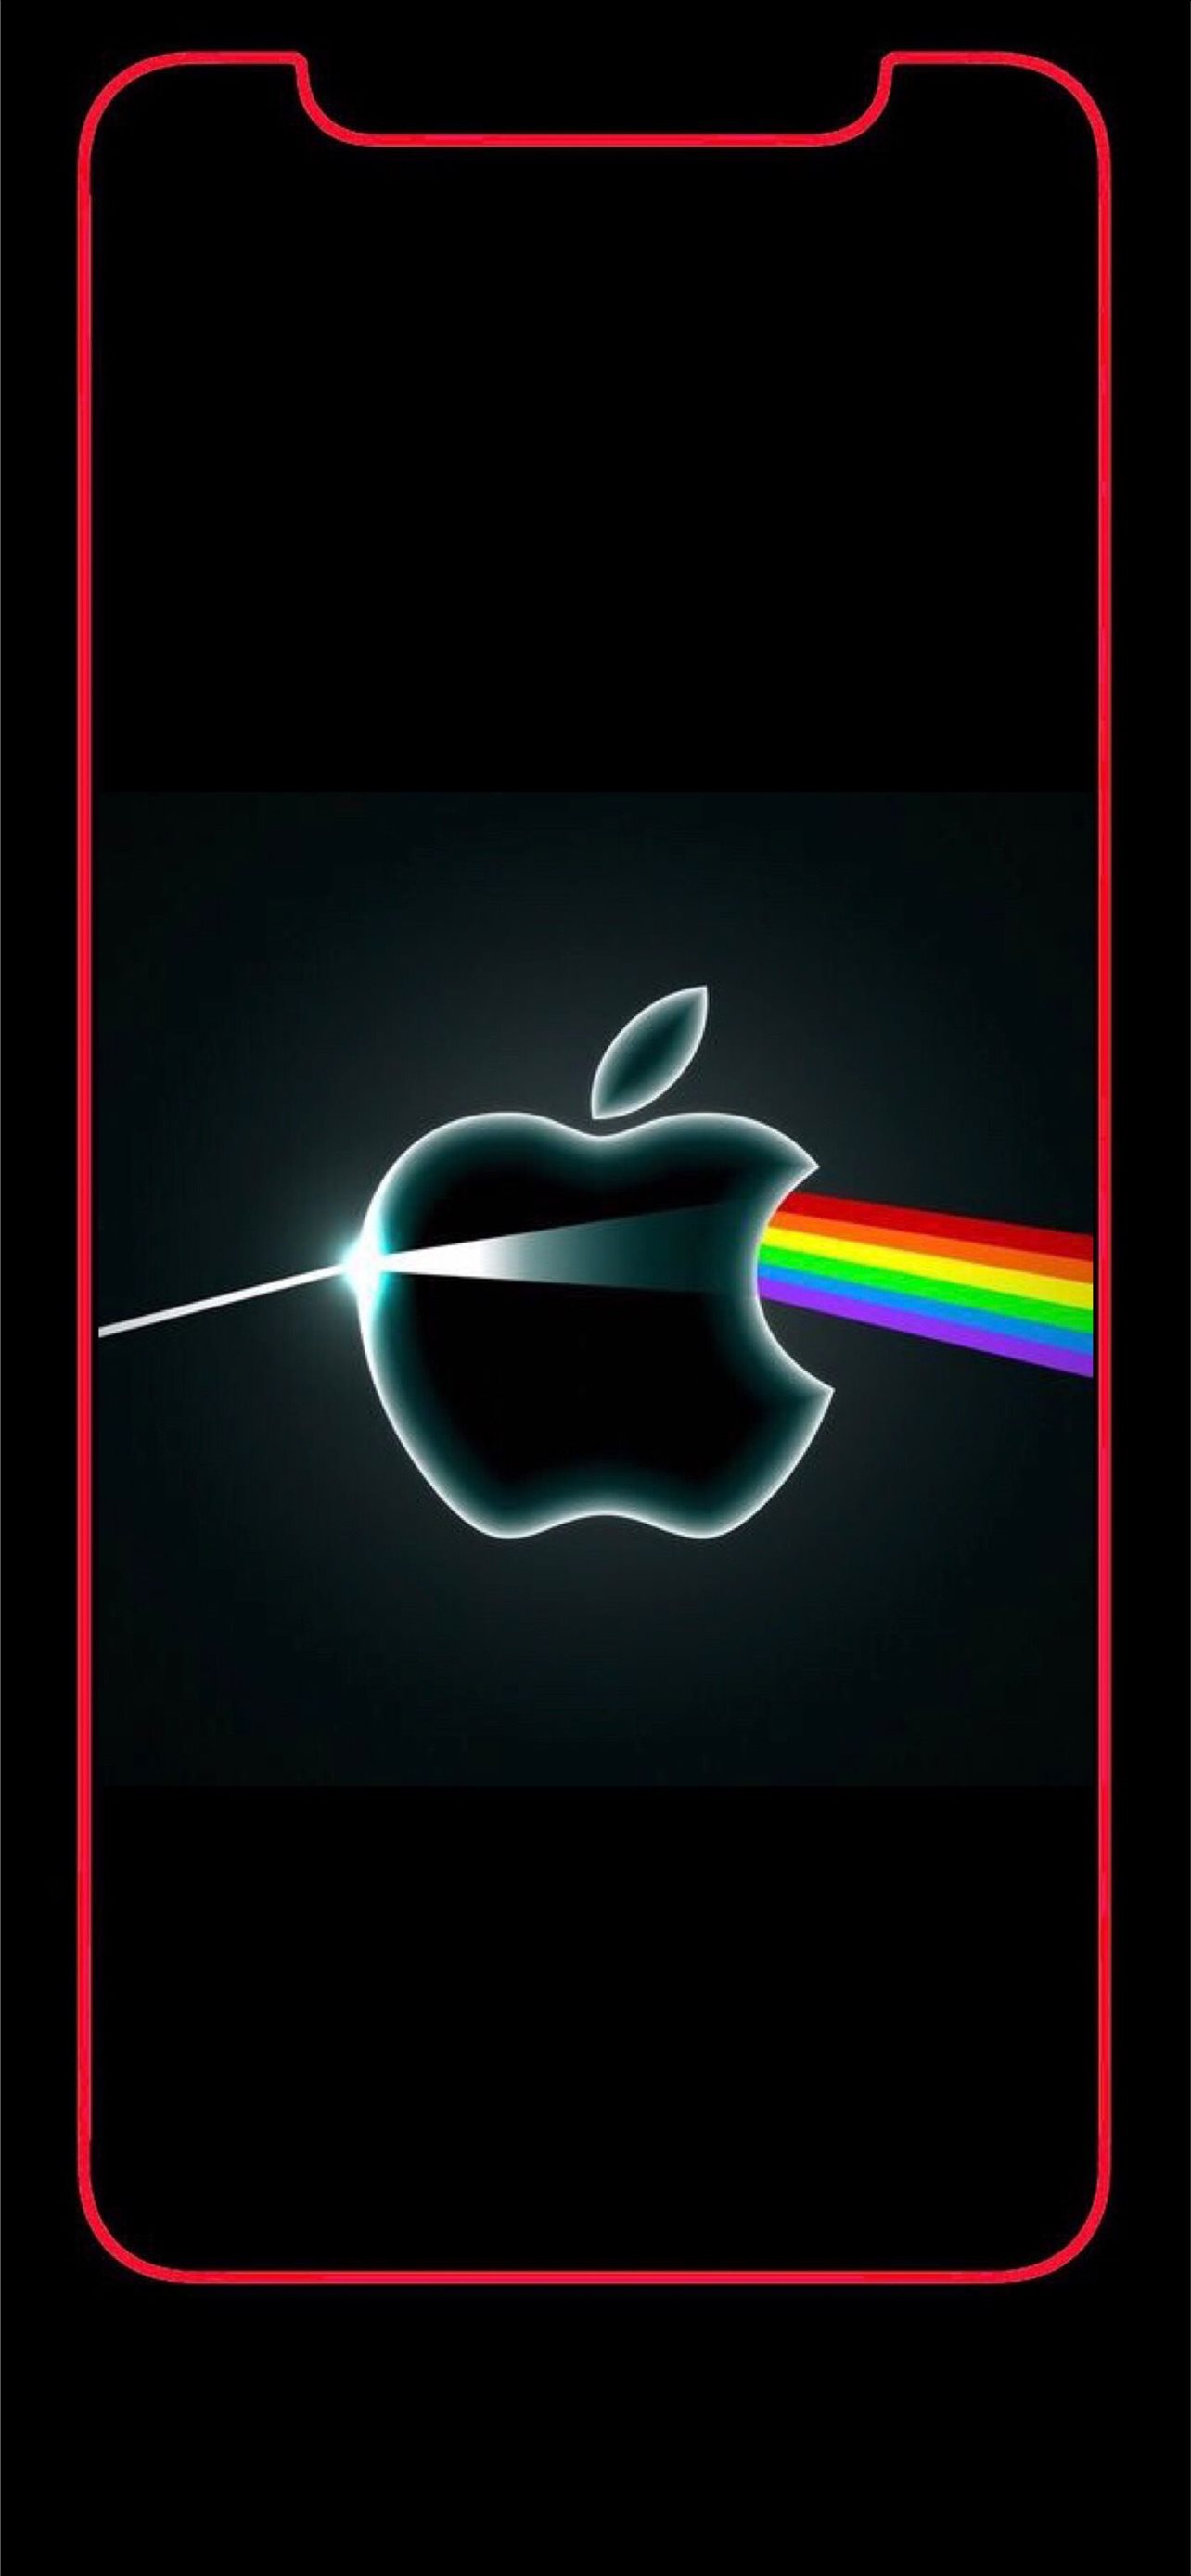 Cool Apple Logo Iphone Wallpapers Wallpapers